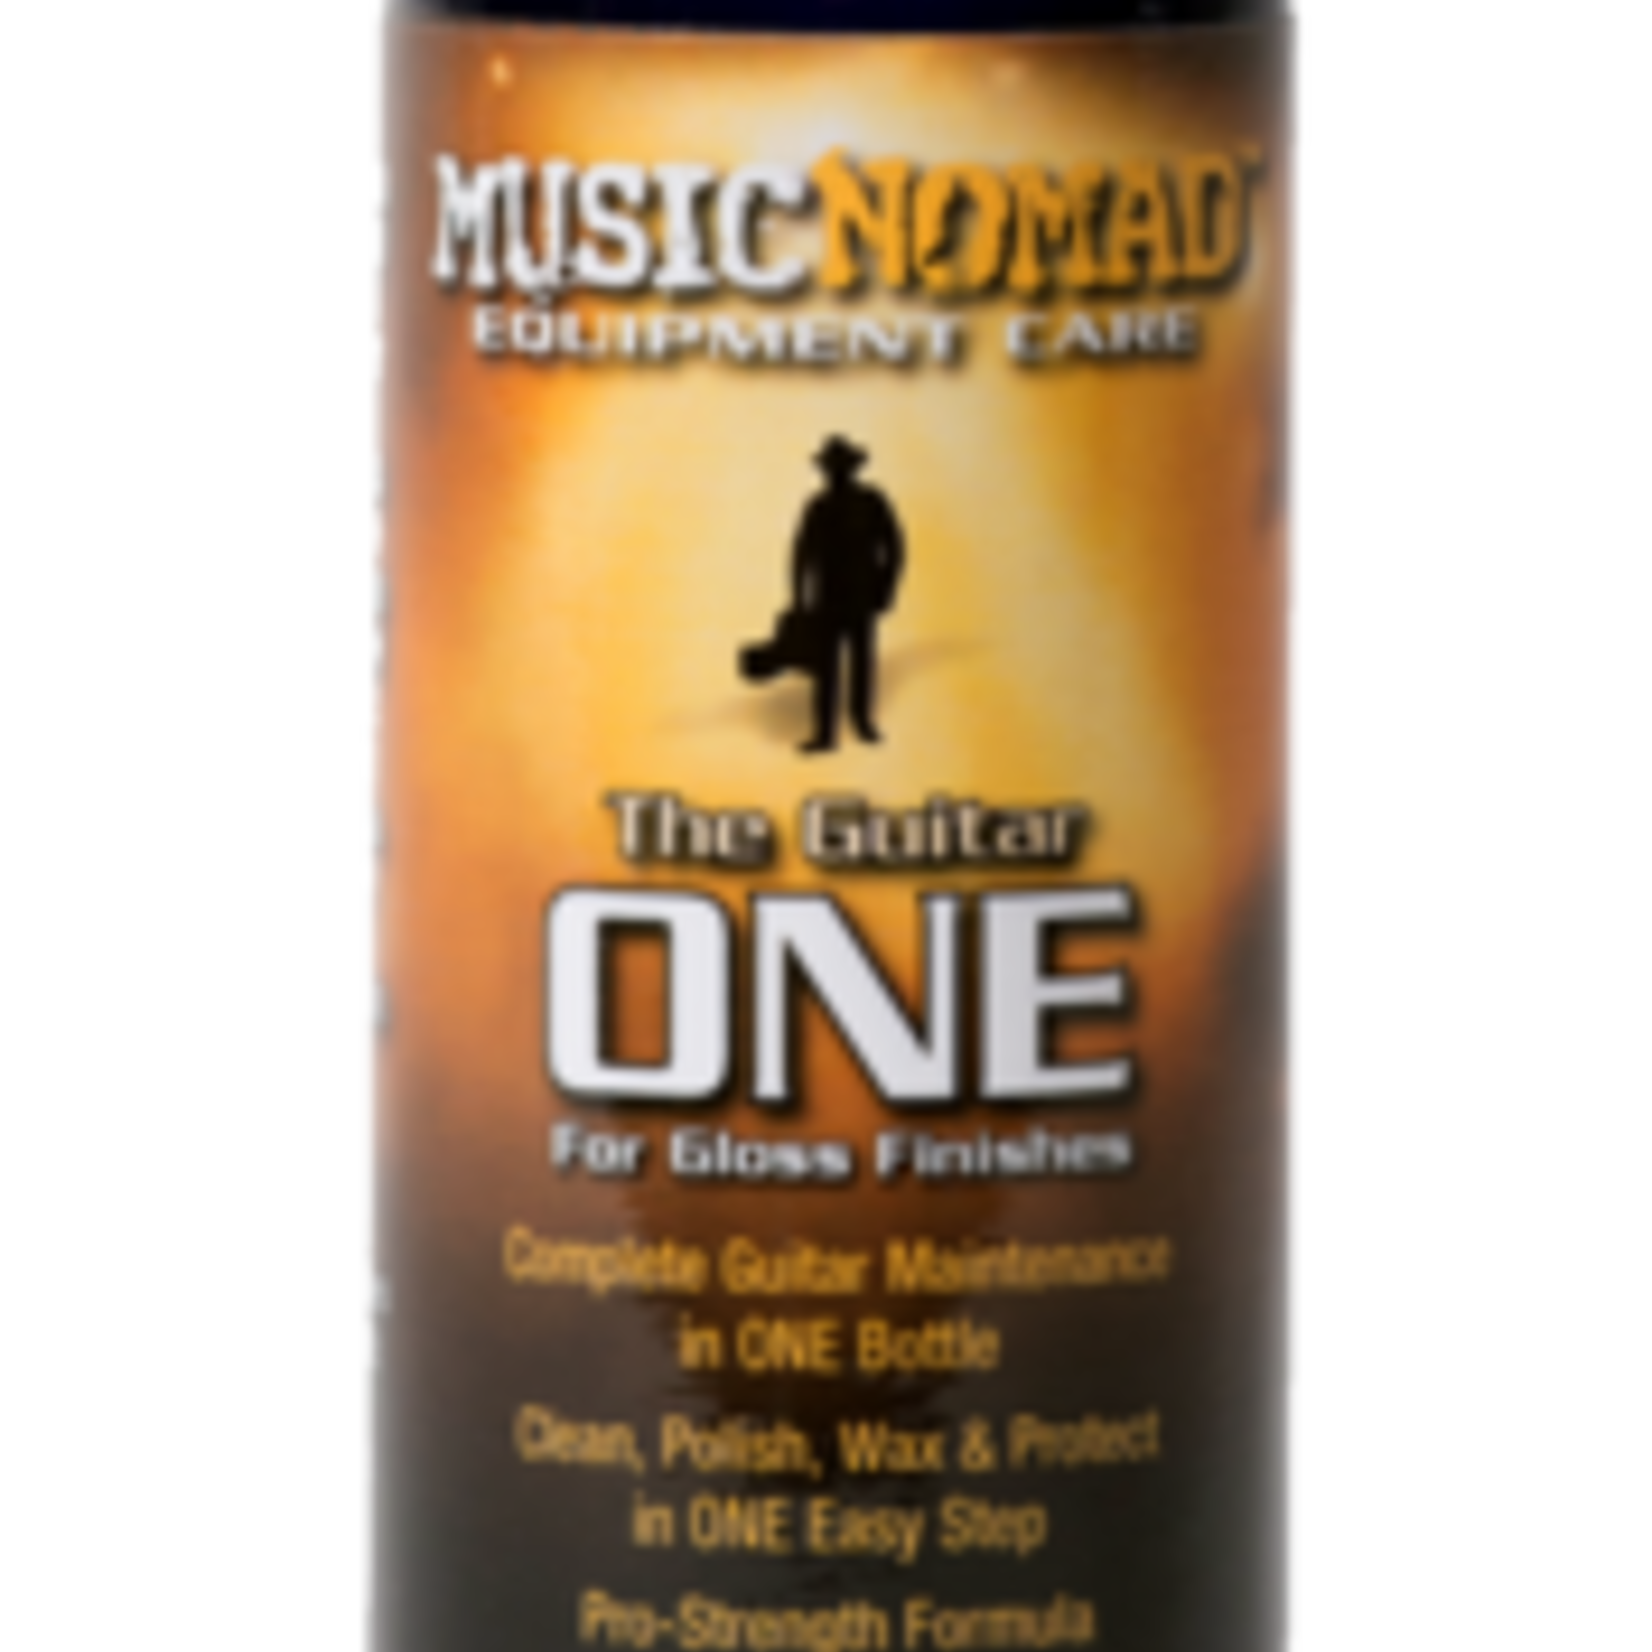 Music Nomad Music Nomad The Guitar ONE - All in 1 Cleaner, Polish, Wax for Gloss Finishes